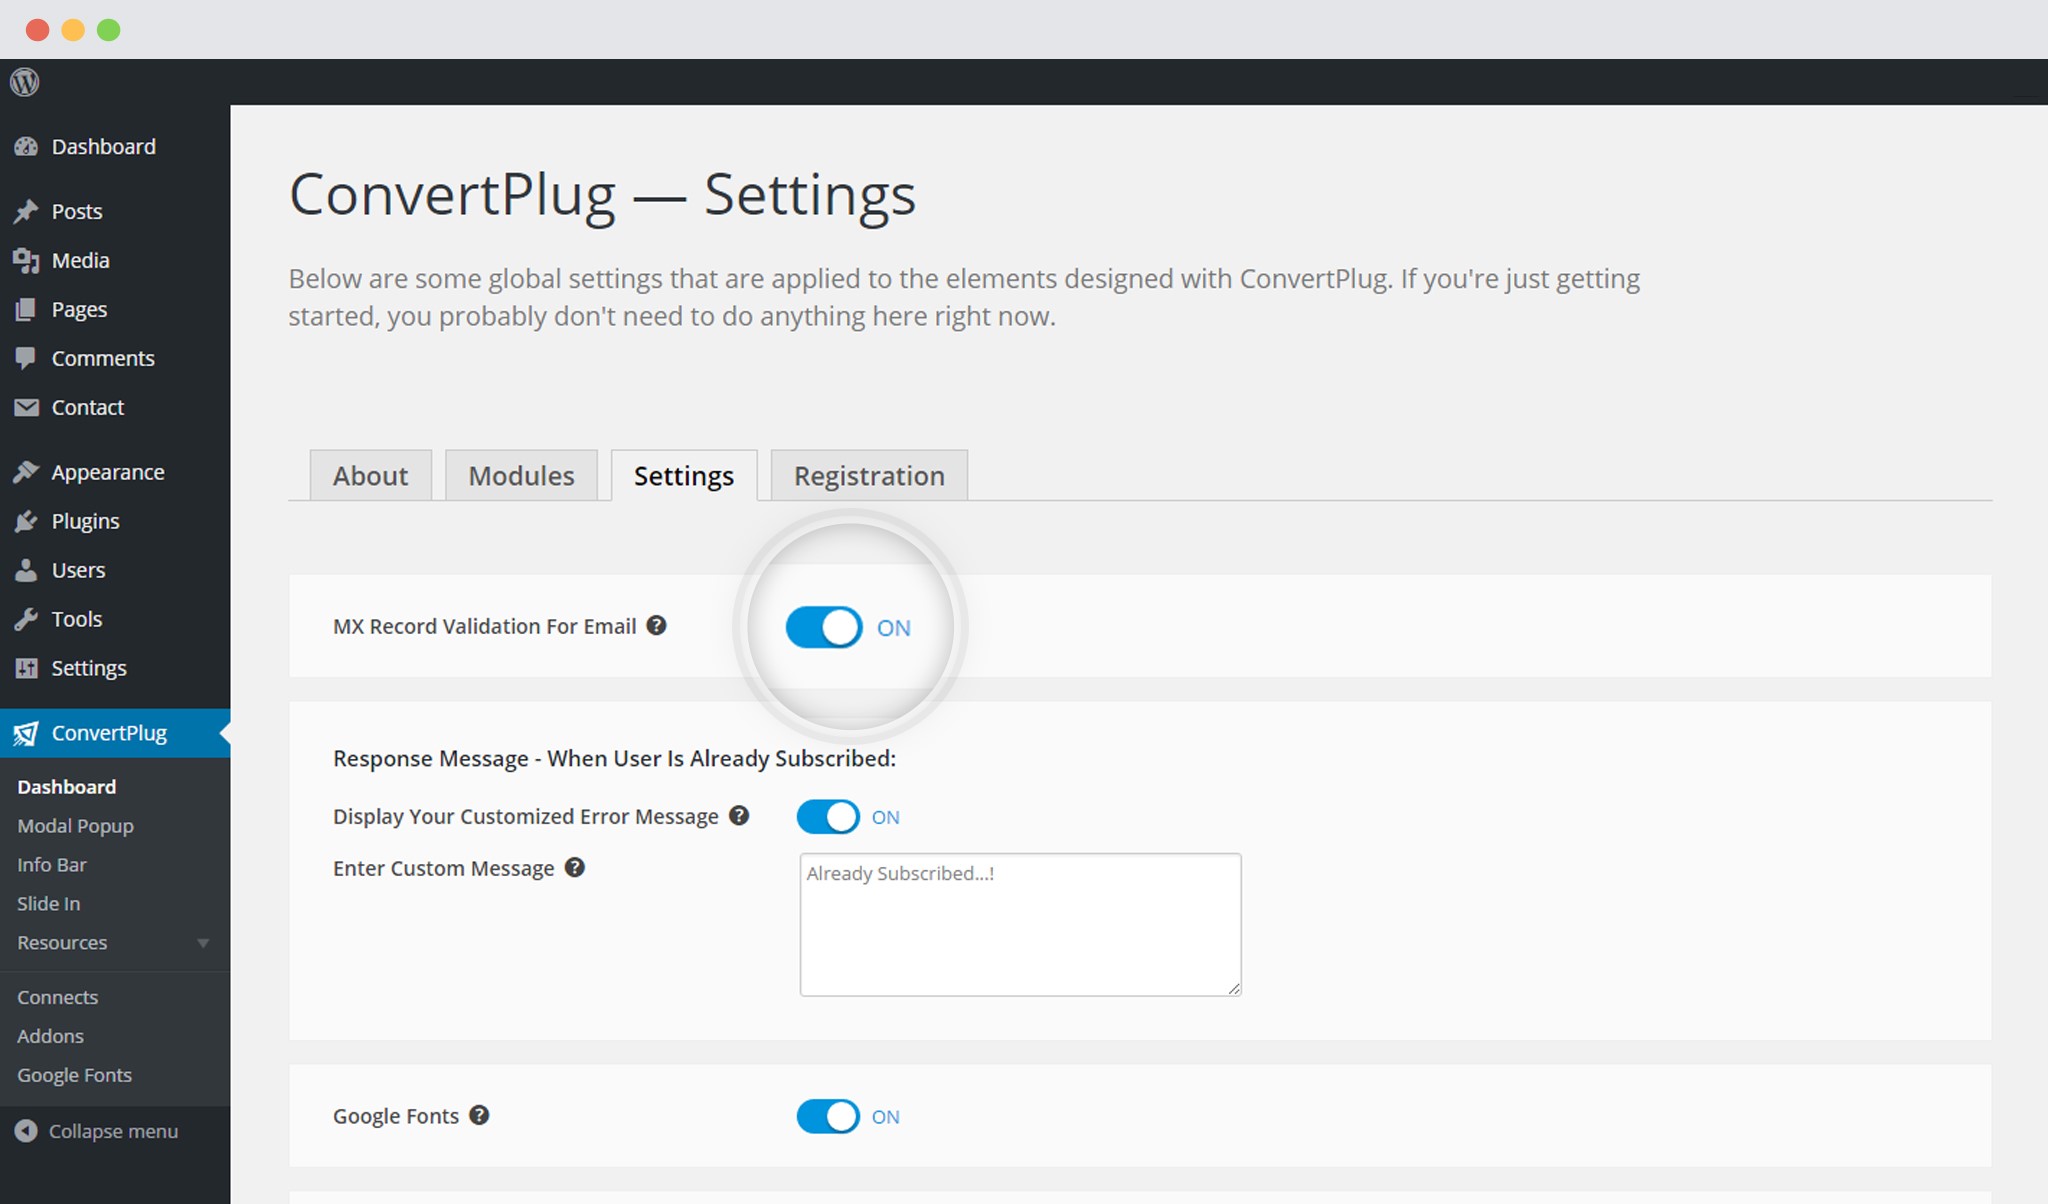 Enable MX Record Validation in ConvertPlug